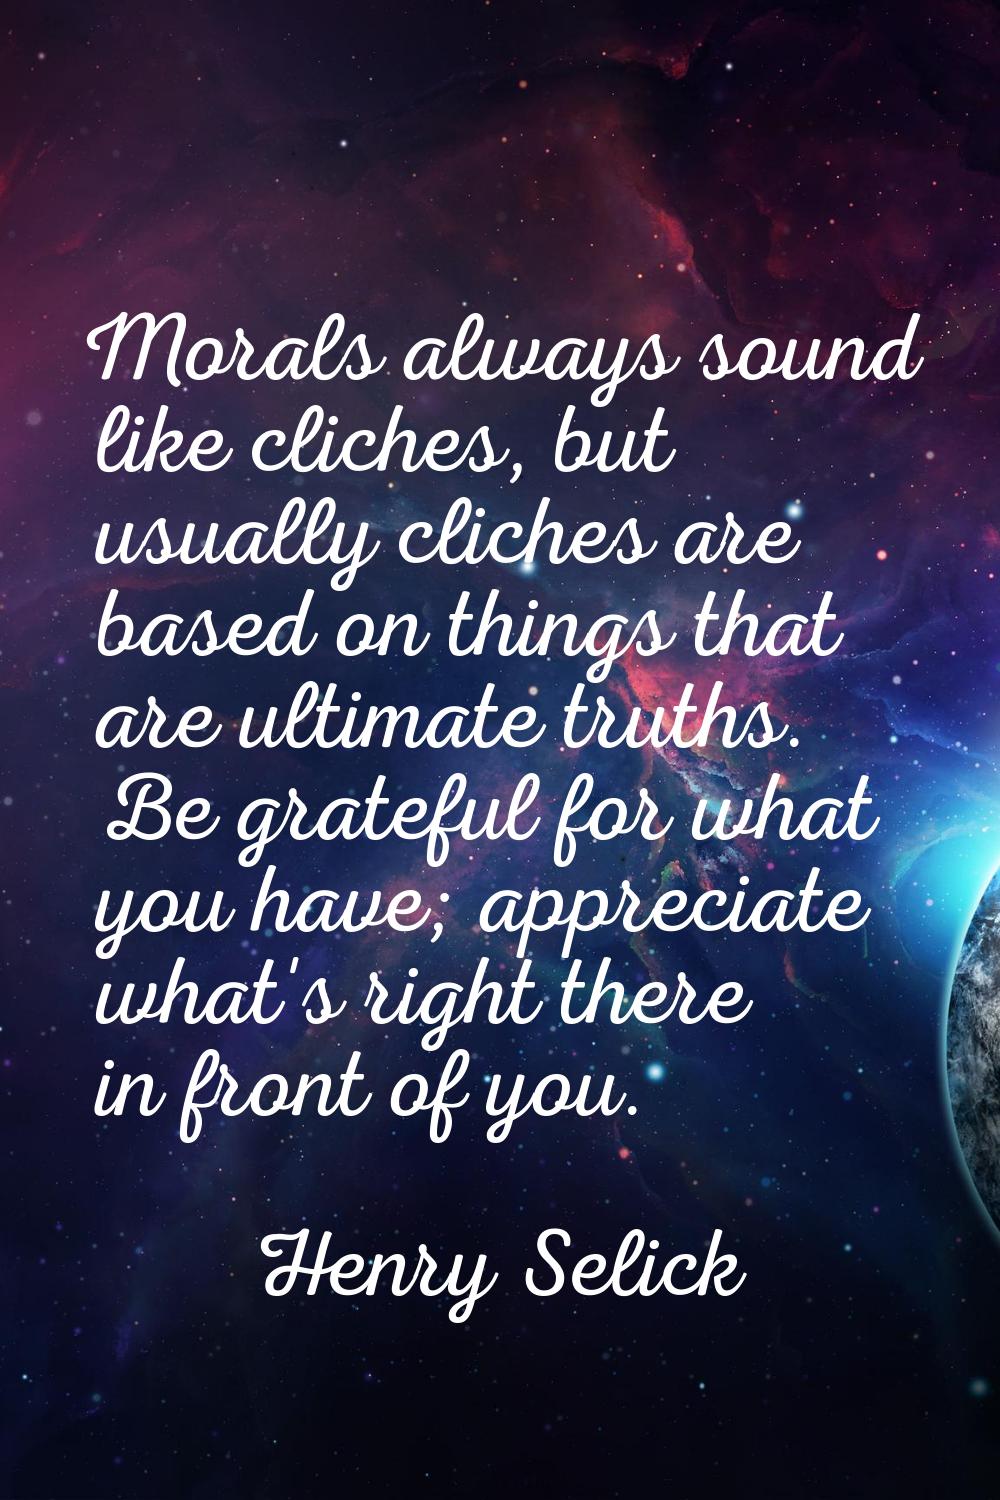 Morals always sound like cliches, but usually cliches are based on things that are ultimate truths.